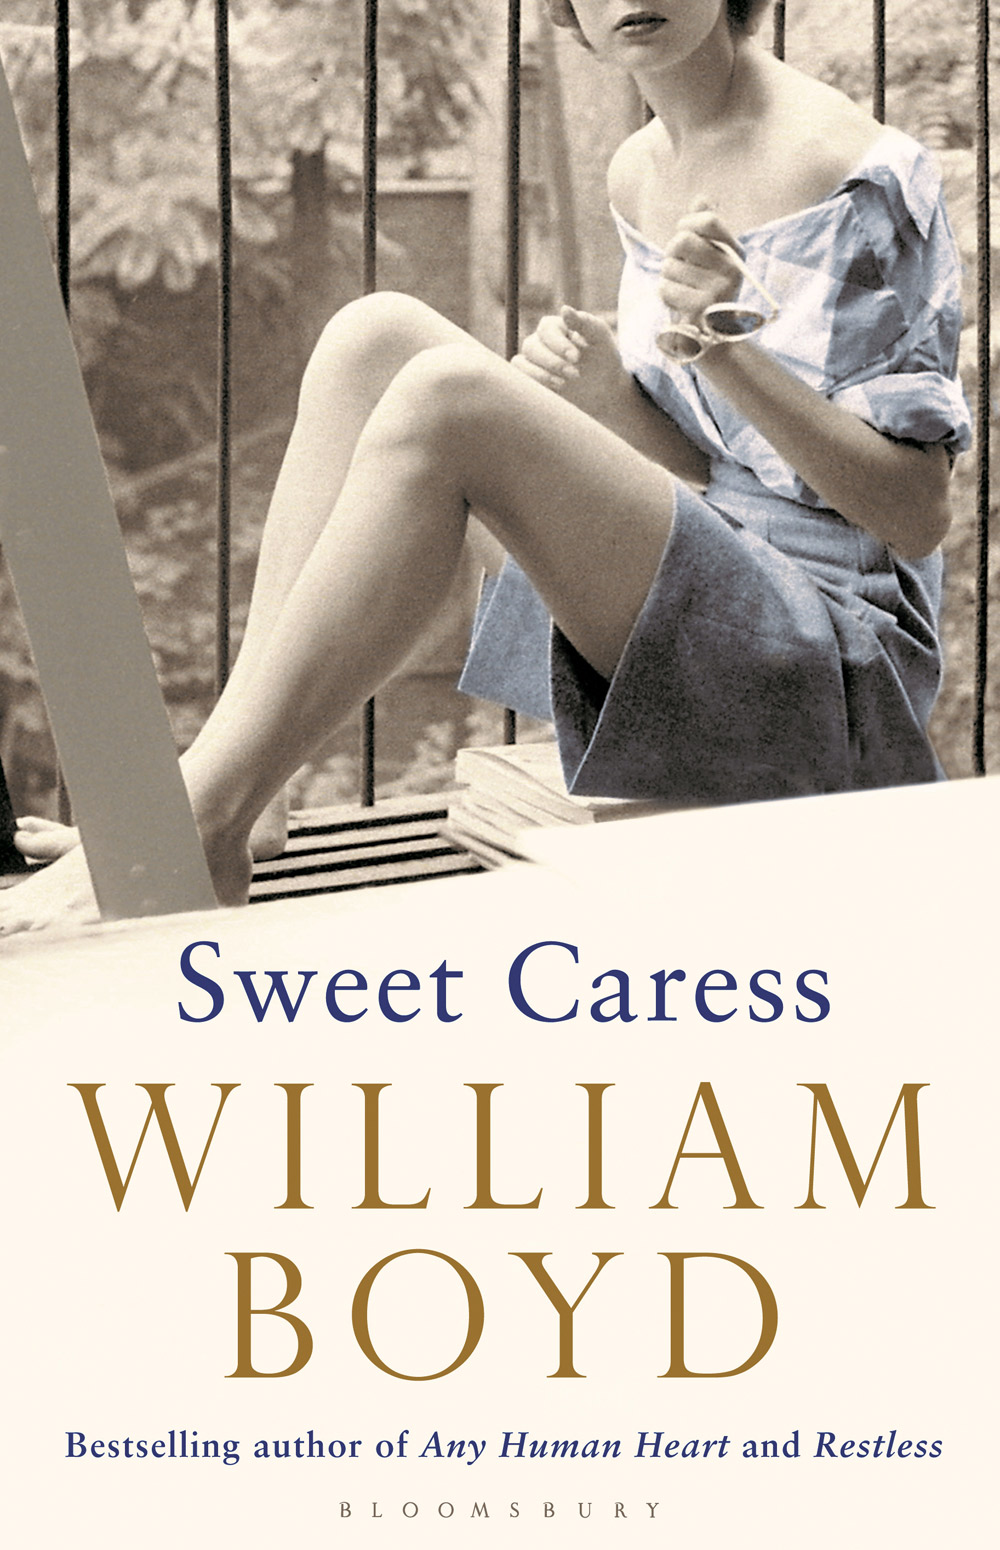 Sweet Caress, by William Boyd, is published by Bloomsbury, $29.99.